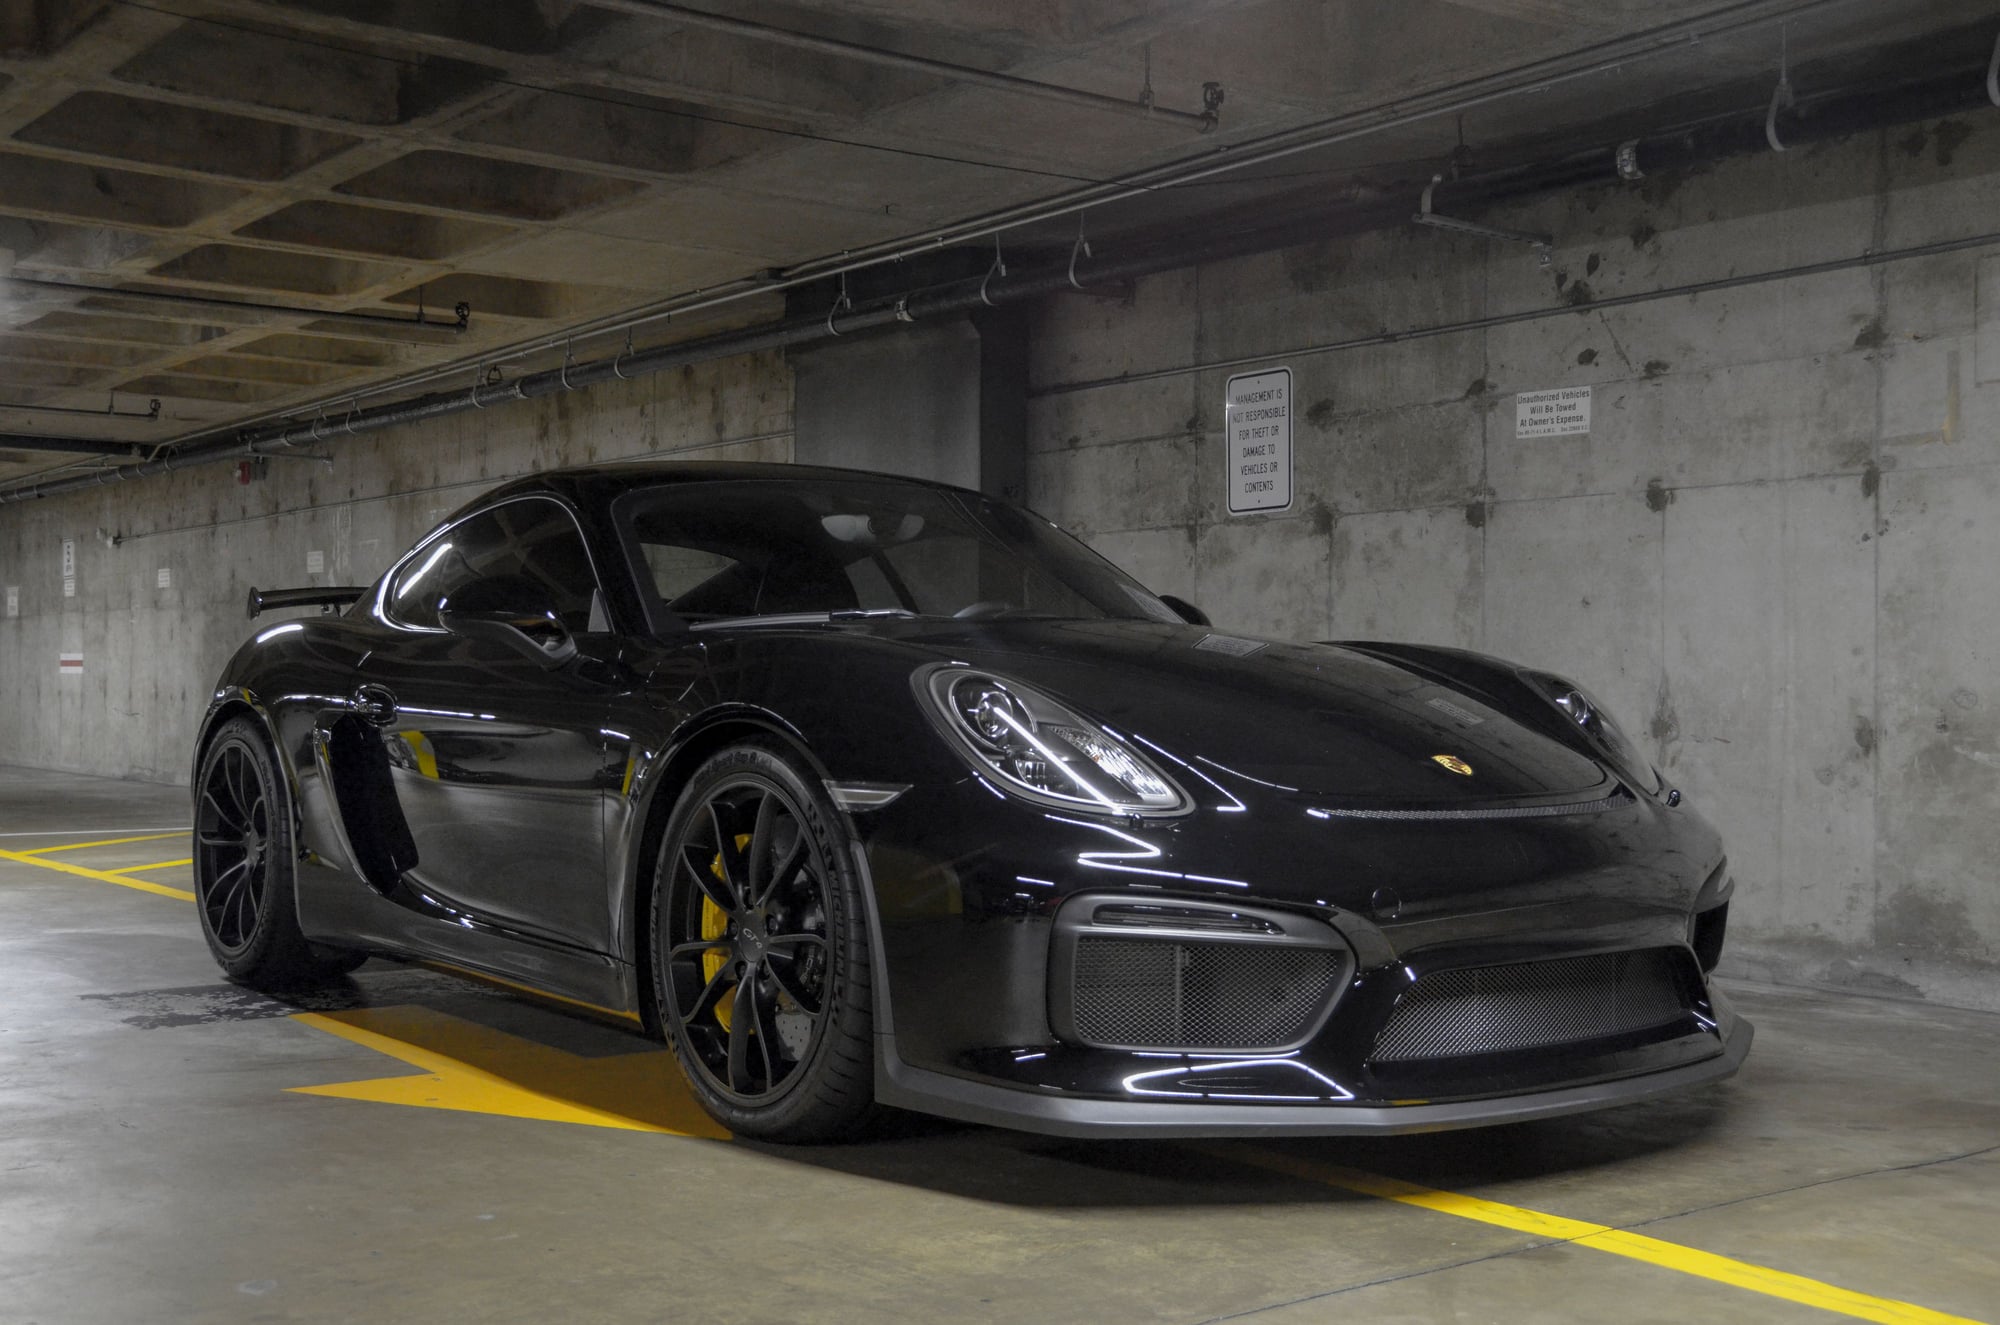 2016 Porsche Cayman GT4 - 2016 GT4, LWBS, PCCB, CPO priced to sell - Used - VIN WP0AC2A89GK191654 - 4,500 Miles - 6 cyl - 2WD - Manual - Coupe - Black - Los Angeles, CA 90067, United States